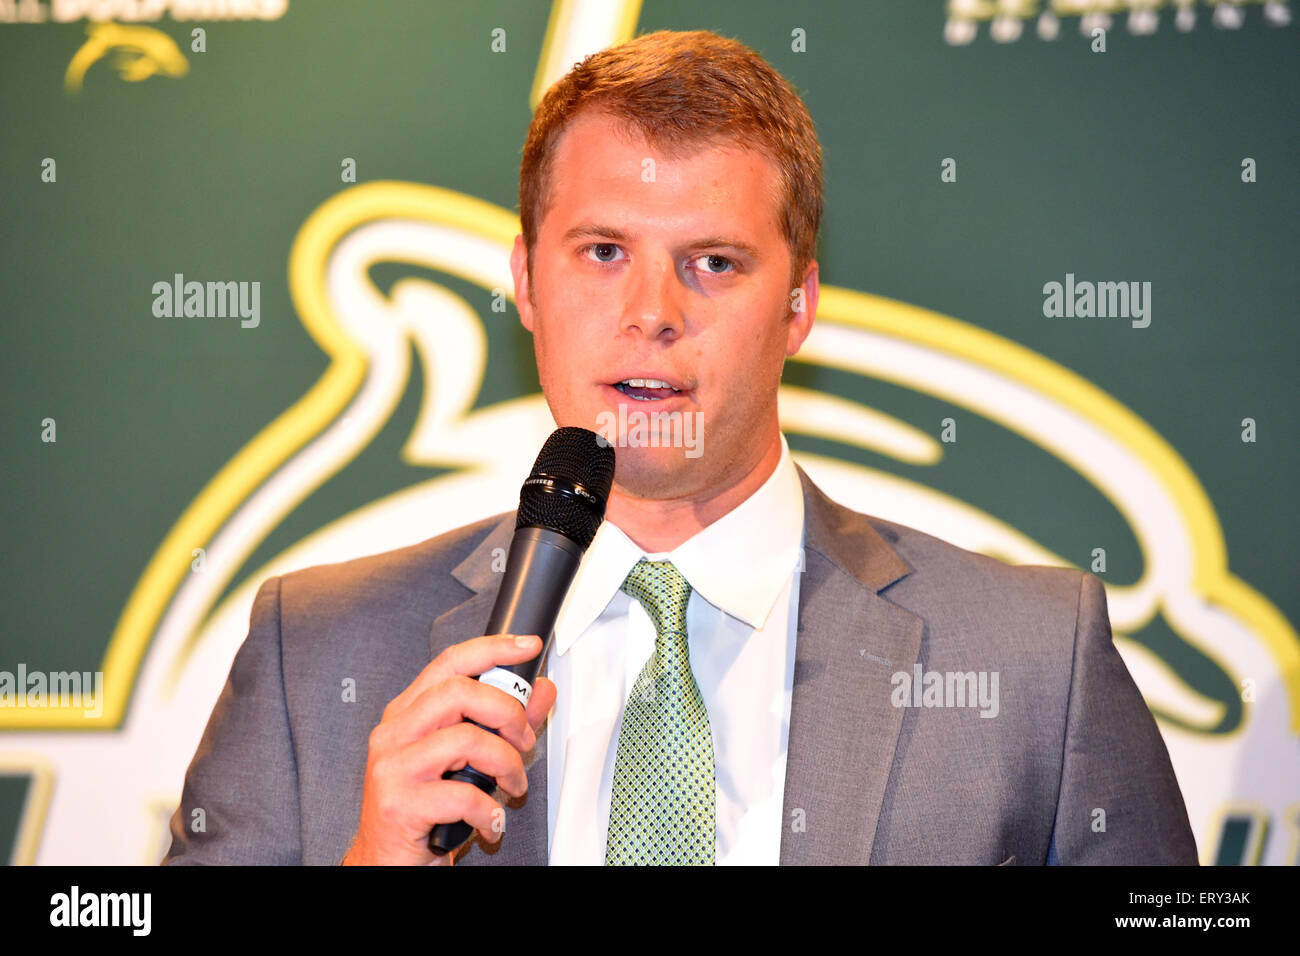 June, 9 2015: Patrick Beilein speaks to the media after being introduced as the new head coach of the Le Moyne Dolphins in Syracuse, New York. Beilein, is the son of current University of Michigan head coach John Beilein (not pictured). Rich Barnes/CSM Stock Photo